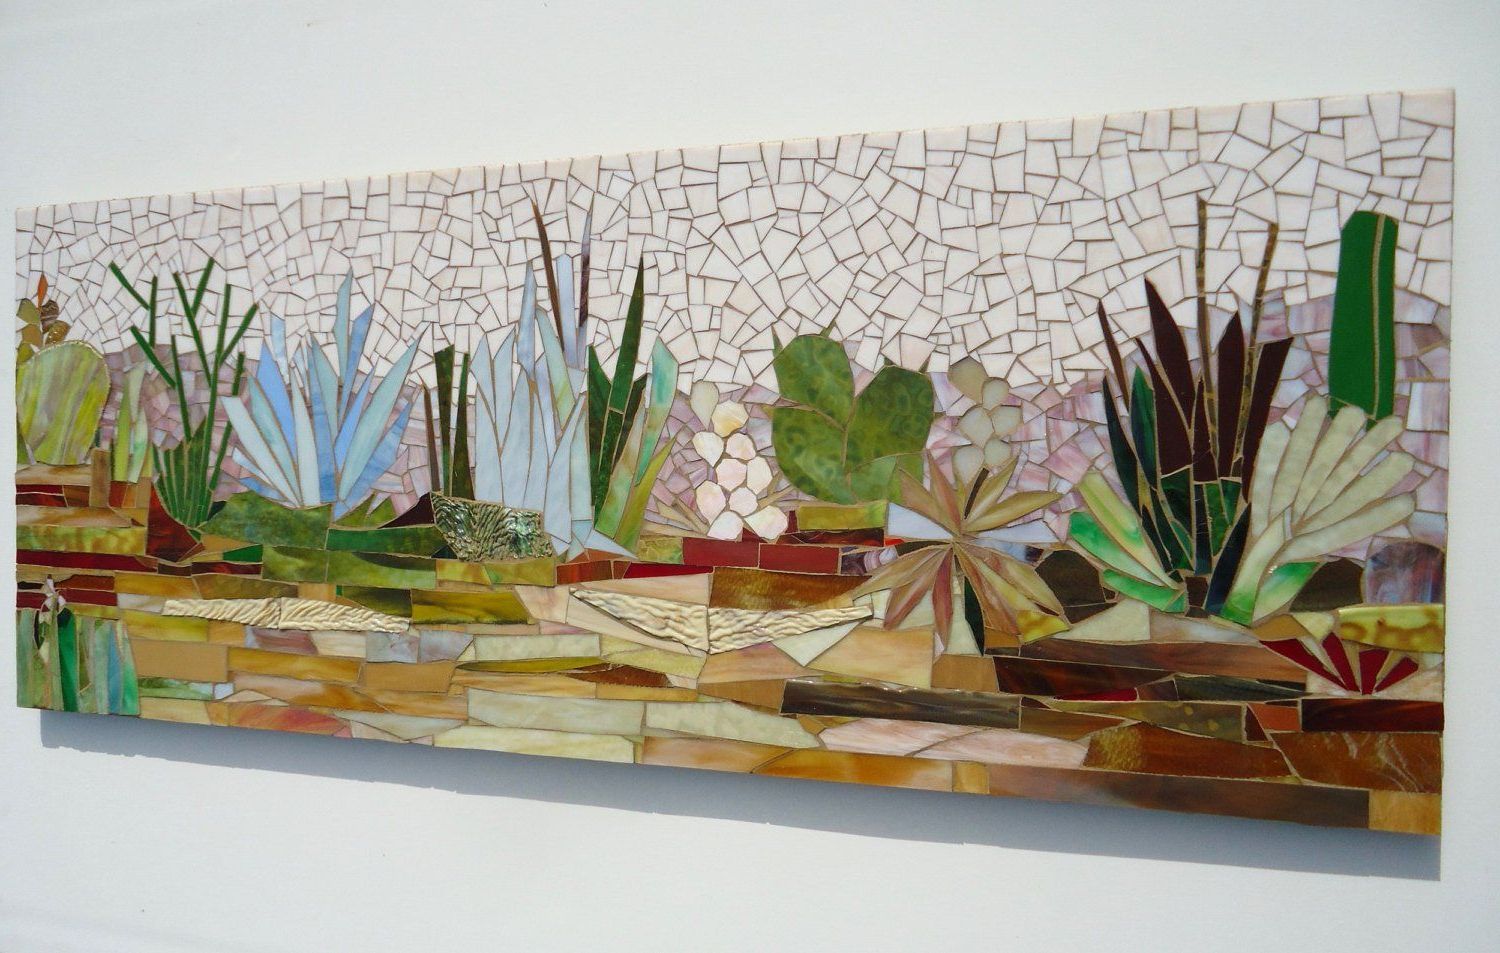 Desert Landscape Cactus Garden Mosaic Wall Art  Made To Throughout Most Up To Date Landscape Wall Art (View 18 of 20)